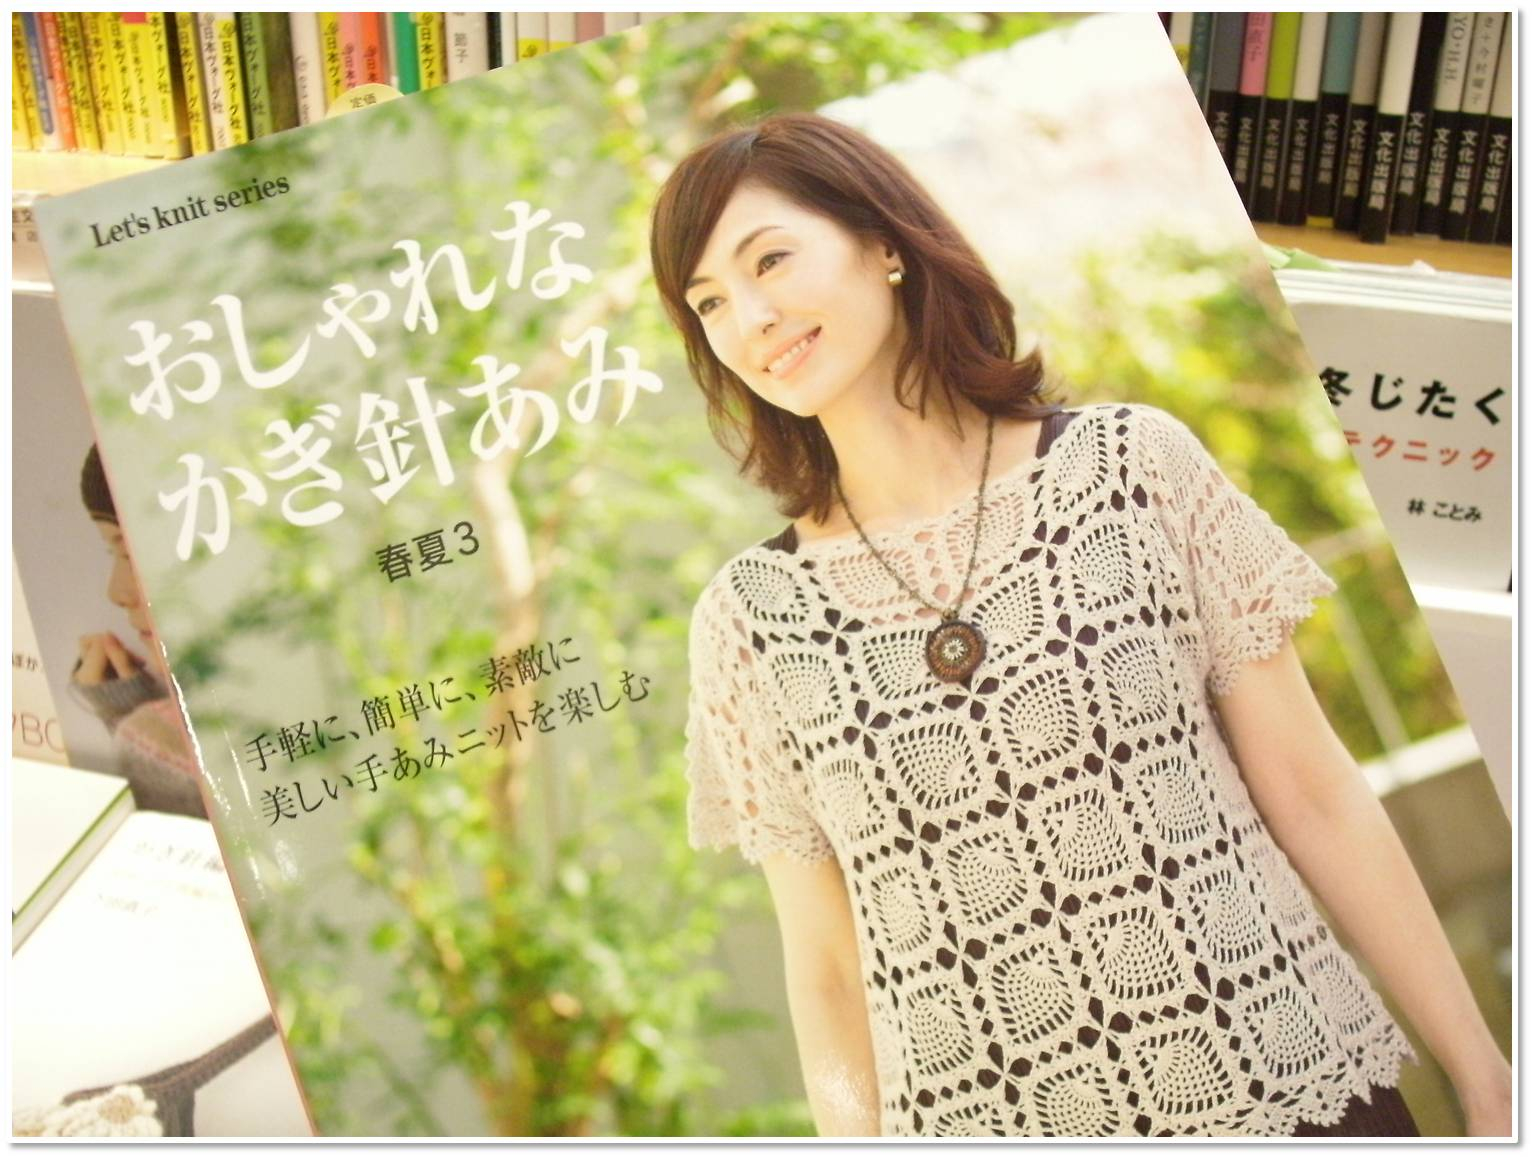 Japanese Crochet Patterns Want To Discover A Whole New World Of Patterns Try Reading Crochet